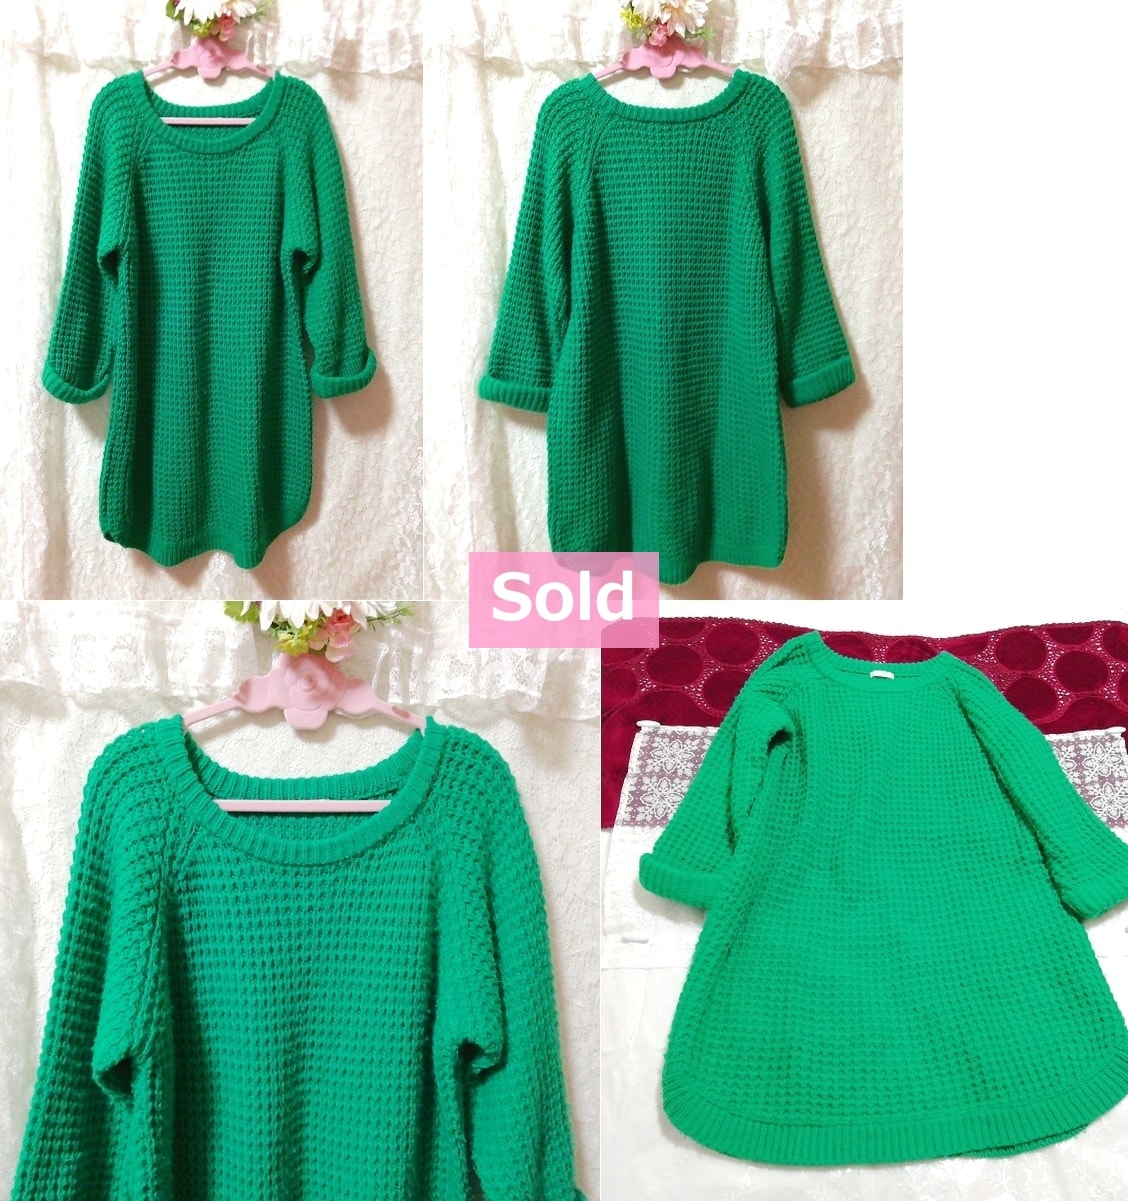 Green green knitted sweater